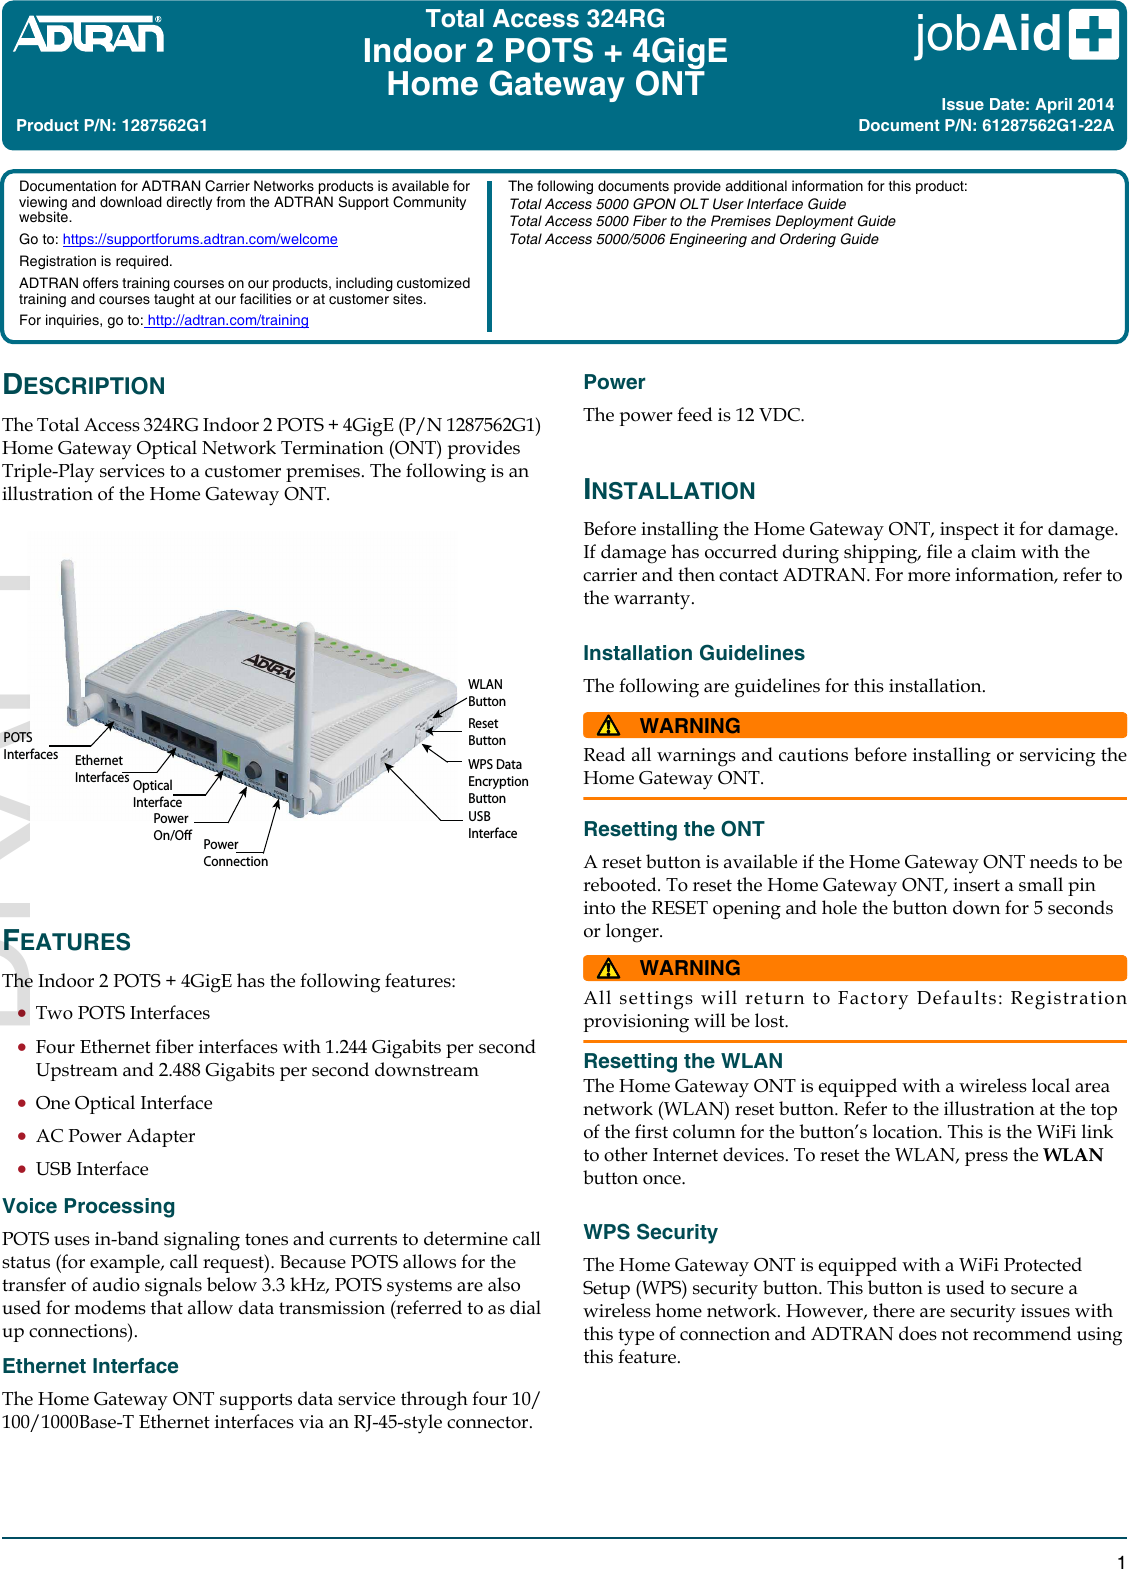 jobAid 1DESCRIPTIONThe Total Access 324RG Indoor 2 POTS + 4GigE (P/N 1287562G1) Home Gateway Optical Network Termination (ONT) provides Triple-Play services to a customer premises. The following is an illustration of the Home Gateway ONT.FEATURESThe Indoor 2 POTS + 4GigE has the following features:Two POTS Interfaces Four Ethernet fiber interfaces with 1.244 Gigabits per second Upstream and 2.488 Gigabits per second downstreamOne Optical InterfaceAC Power AdapterUSB InterfaceVoice ProcessingPOTS uses in-band signaling tones and currents to determine call status (for example, call request). Because POTS allows for the transfer of audio signals below 3.3 kHz, POTS systems are also used for modems that allow data transmission (referred to as dial up connections). Ethernet InterfaceThe Home Gateway ONT supports data service through four 10/100/1000Base-T Ethernet interfaces via an RJ-45-style connector. Reset ButtonWPS DataEncryptionButtonUSB InterfaceOpticalInterfacePowerConnectionPower On/OEthernetInterfacesPOTSInterfacesWLAN ButtonTotal Access 324RGIndoor 2 POTS + 4GigEHome Gateway ONTPowerThe power feed is 12 VDC. INSTALLATIONBefore installing the Home Gateway ONT, inspect it for damage. If damage has occurred during shipping, file a claim with the carrier and then contact ADTRAN. For more information, refer to the warranty.Installation GuidelinesThe following are guidelines for this installation.WARNING!Read all warnings and cautions before installing or servicing theHome Gateway ONT.Resetting the ONTA reset button is available if the Home Gateway ONT needs to be rebooted. To reset the Home Gateway ONT, insert a small pin into the RESET opening and hole the button down for 5 seconds or longer. WARNING!All settings will return to Factory Defaults: Registrationprovisioning will be lost.Resetting the WLANThe Home Gateway ONT is equipped with a wireless local area network (WLAN) reset button. Refer to the illustration at the top of the first column for the button’s location. This is the WiFi link to other Internet devices. To reset the WLAN, press the WLAN button once.WPS SecurityThe Home Gateway ONT is equipped with a WiFi Protected Setup (WPS) security button. This button is used to secure a wireless home network. However, there are security issues with this type of connection and ADTRAN does not recommend using this feature.Product P/N: 1287562G1Issue Date: April 2014Document P/N: 61287562G1-22ADocumentation for ADTRAN Carrier Networks products is available for viewing and download directly from the ADTRAN Support Community website. Go to: https://supportforums.adtran.com/welcomeRegistration is required.ADTRAN offers training courses on our products, including customized training and courses taught at our facilities or at customer sites.For inquiries, go to: http://adtran.com/trainingThe following documents provide additional information for this product:Total Access 5000 GPON OLT User Interface GuideTotal Access 5000 Fiber to the Premises Deployment GuideTotal Access 5000/5006 Engineering and Ordering GuideDRAFT